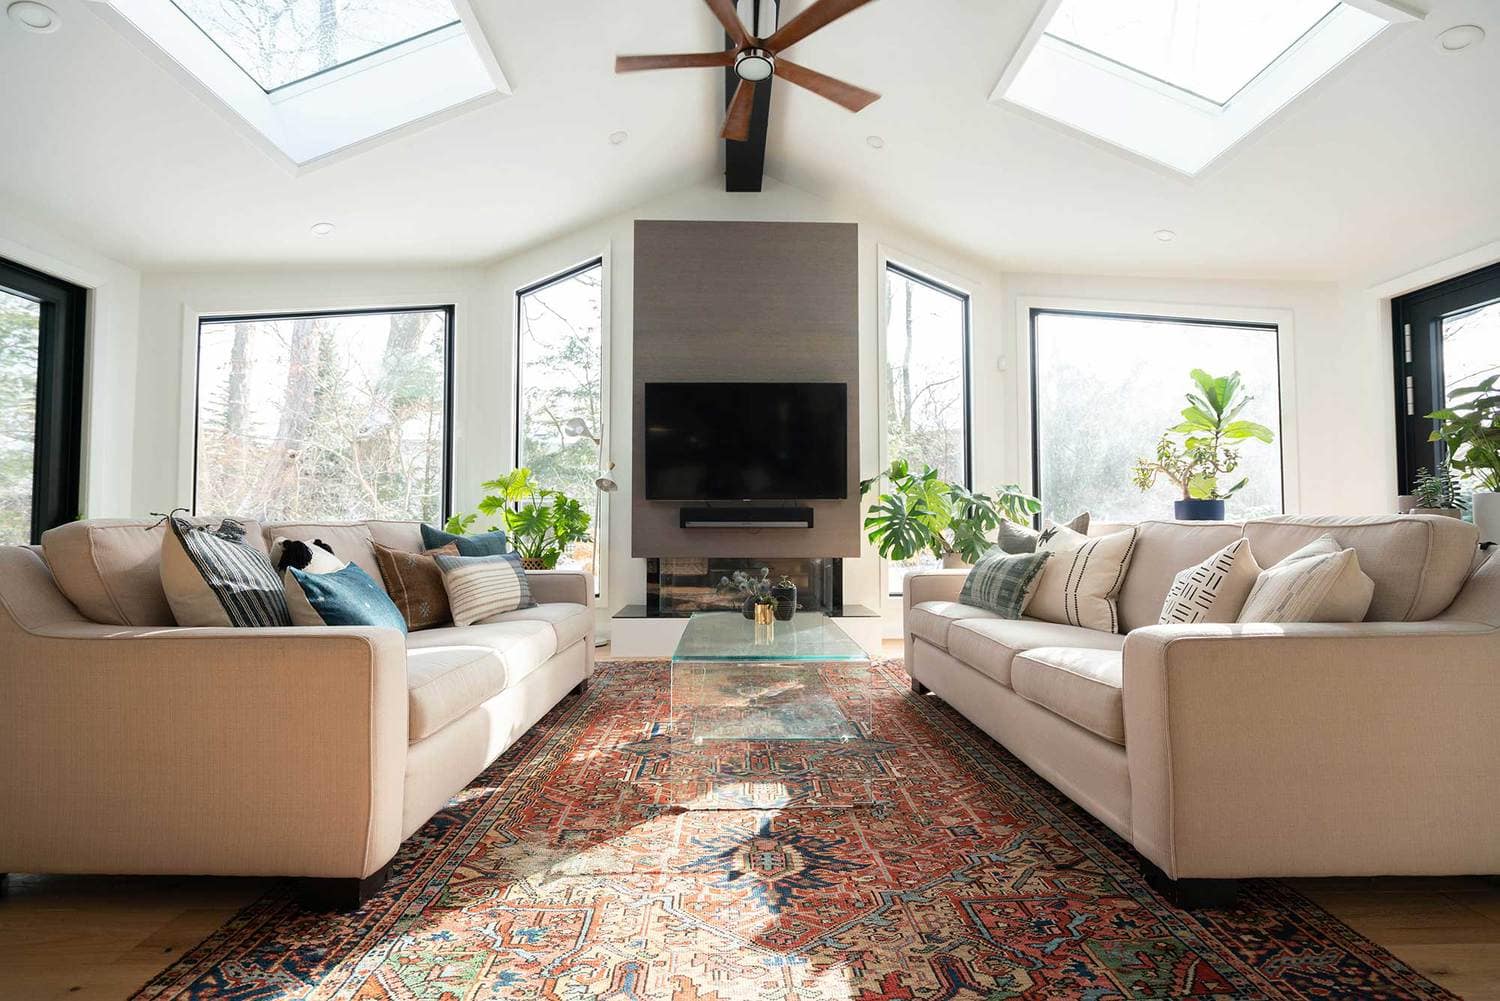 Rug Room Sizing  Living room rug placement, Living room rug size, Rug  placement